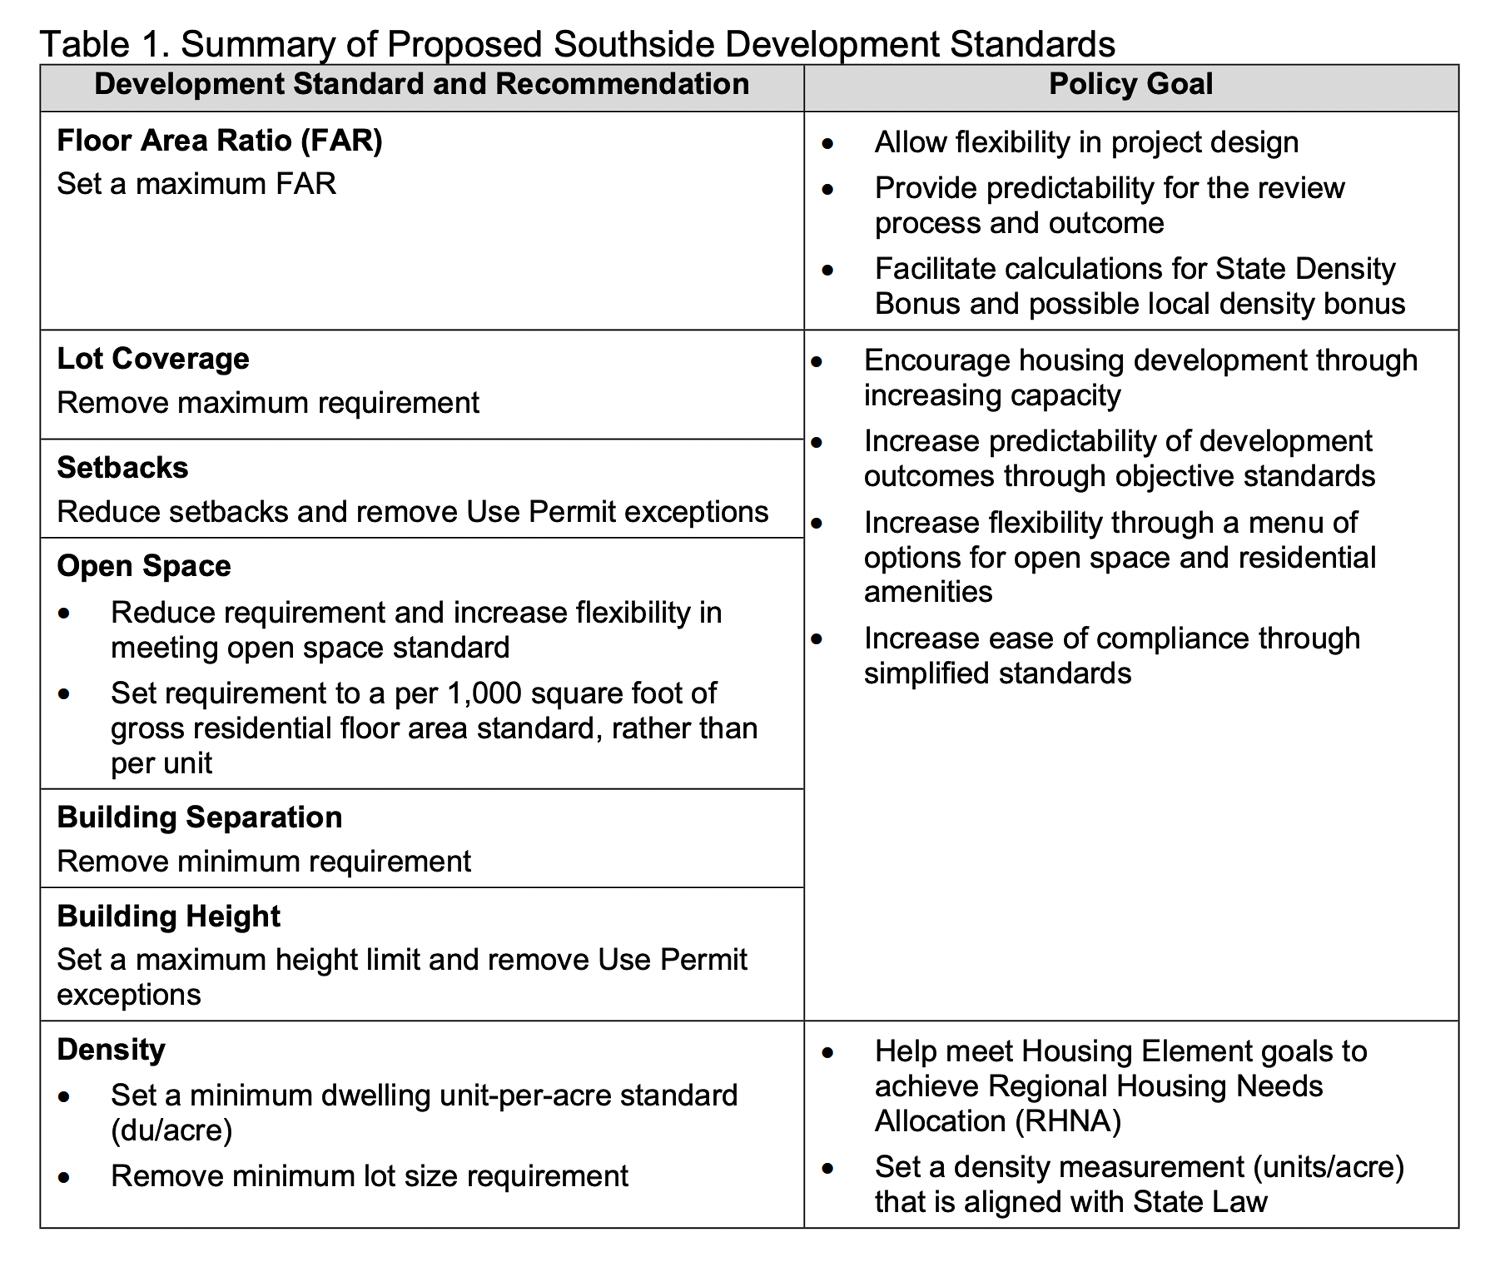 Southside proposed development standards, image from City Council documents